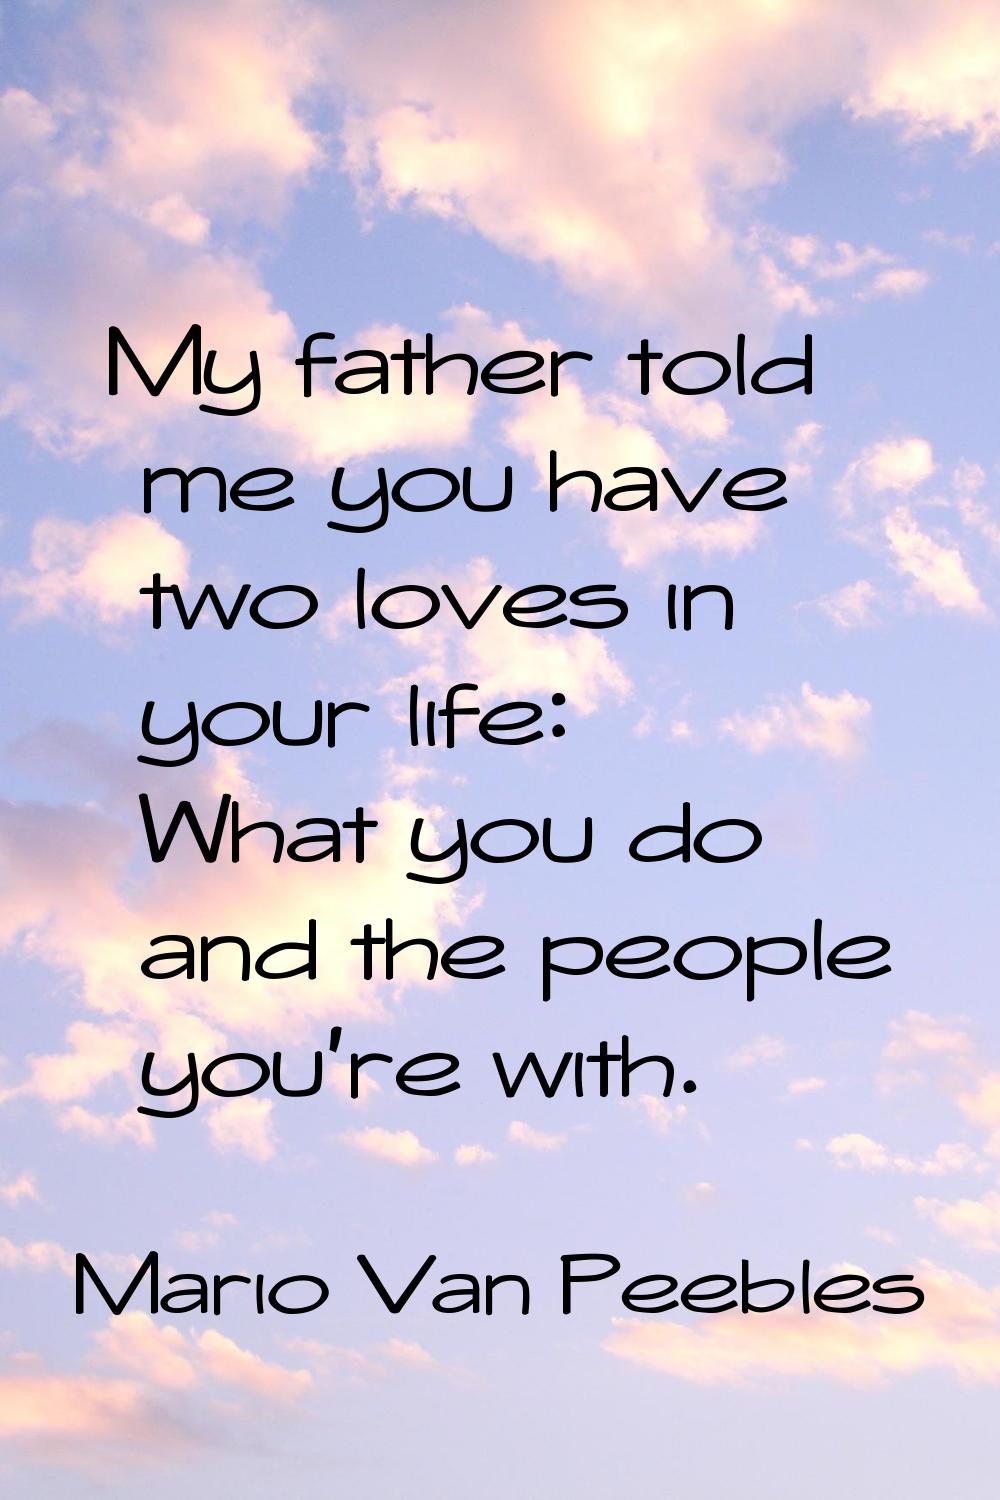 My father told me you have two loves in your life: What you do and the people you're with.